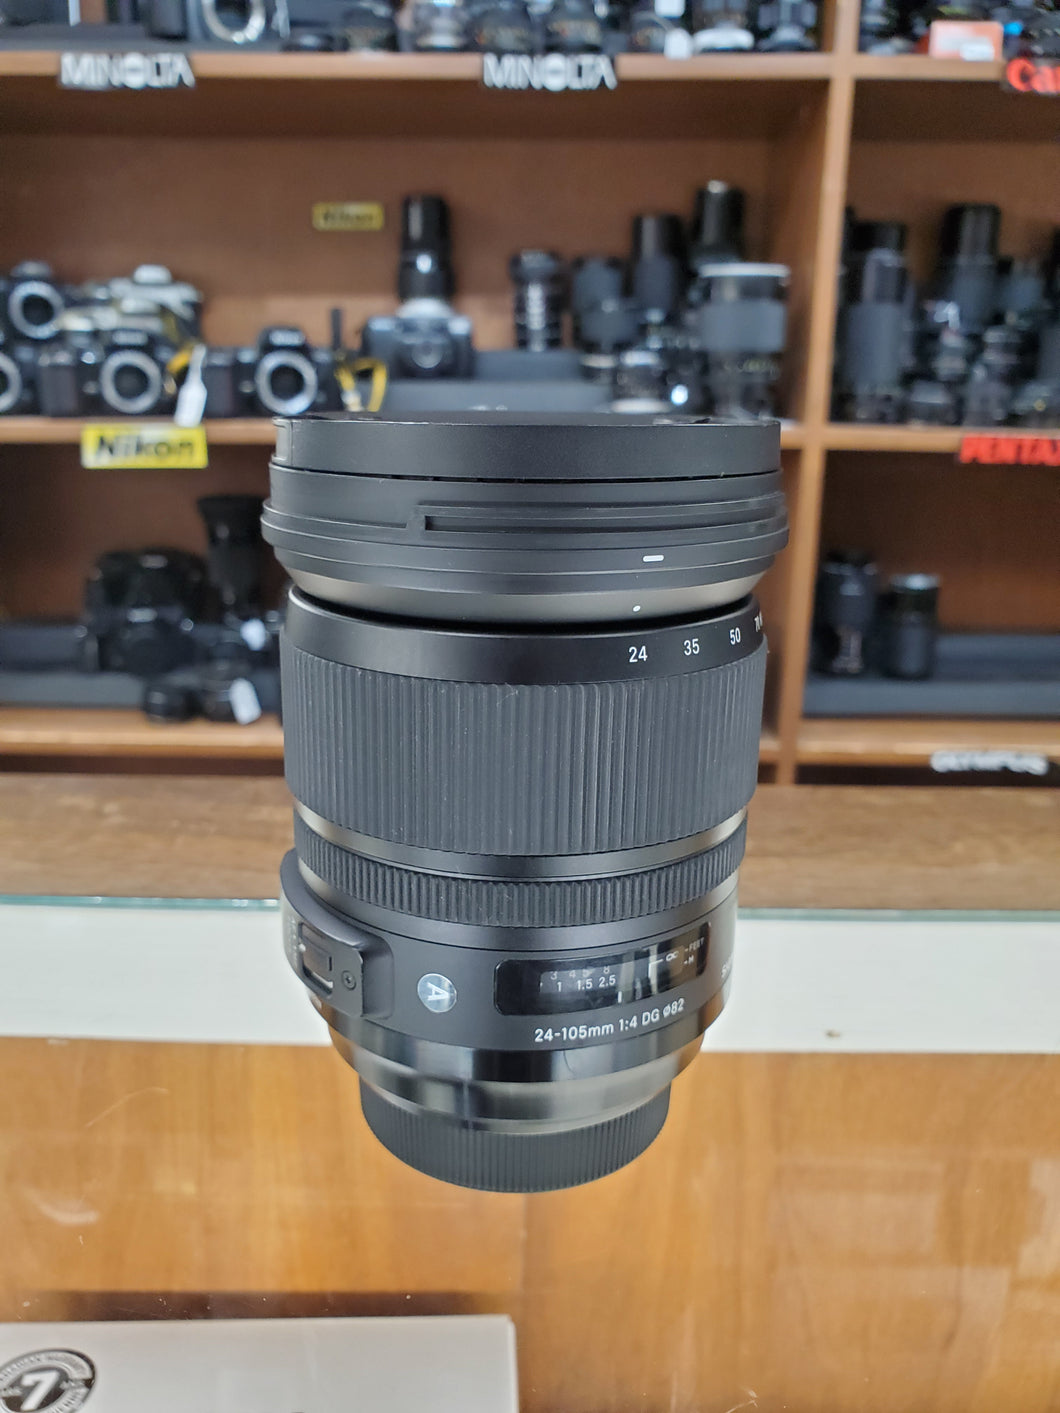 Sigma ART 24-105mm F4 DG OS HSM Zoom Lens for Sony A Mount - Used Condition 9/10 - Paramount Camera & Repair